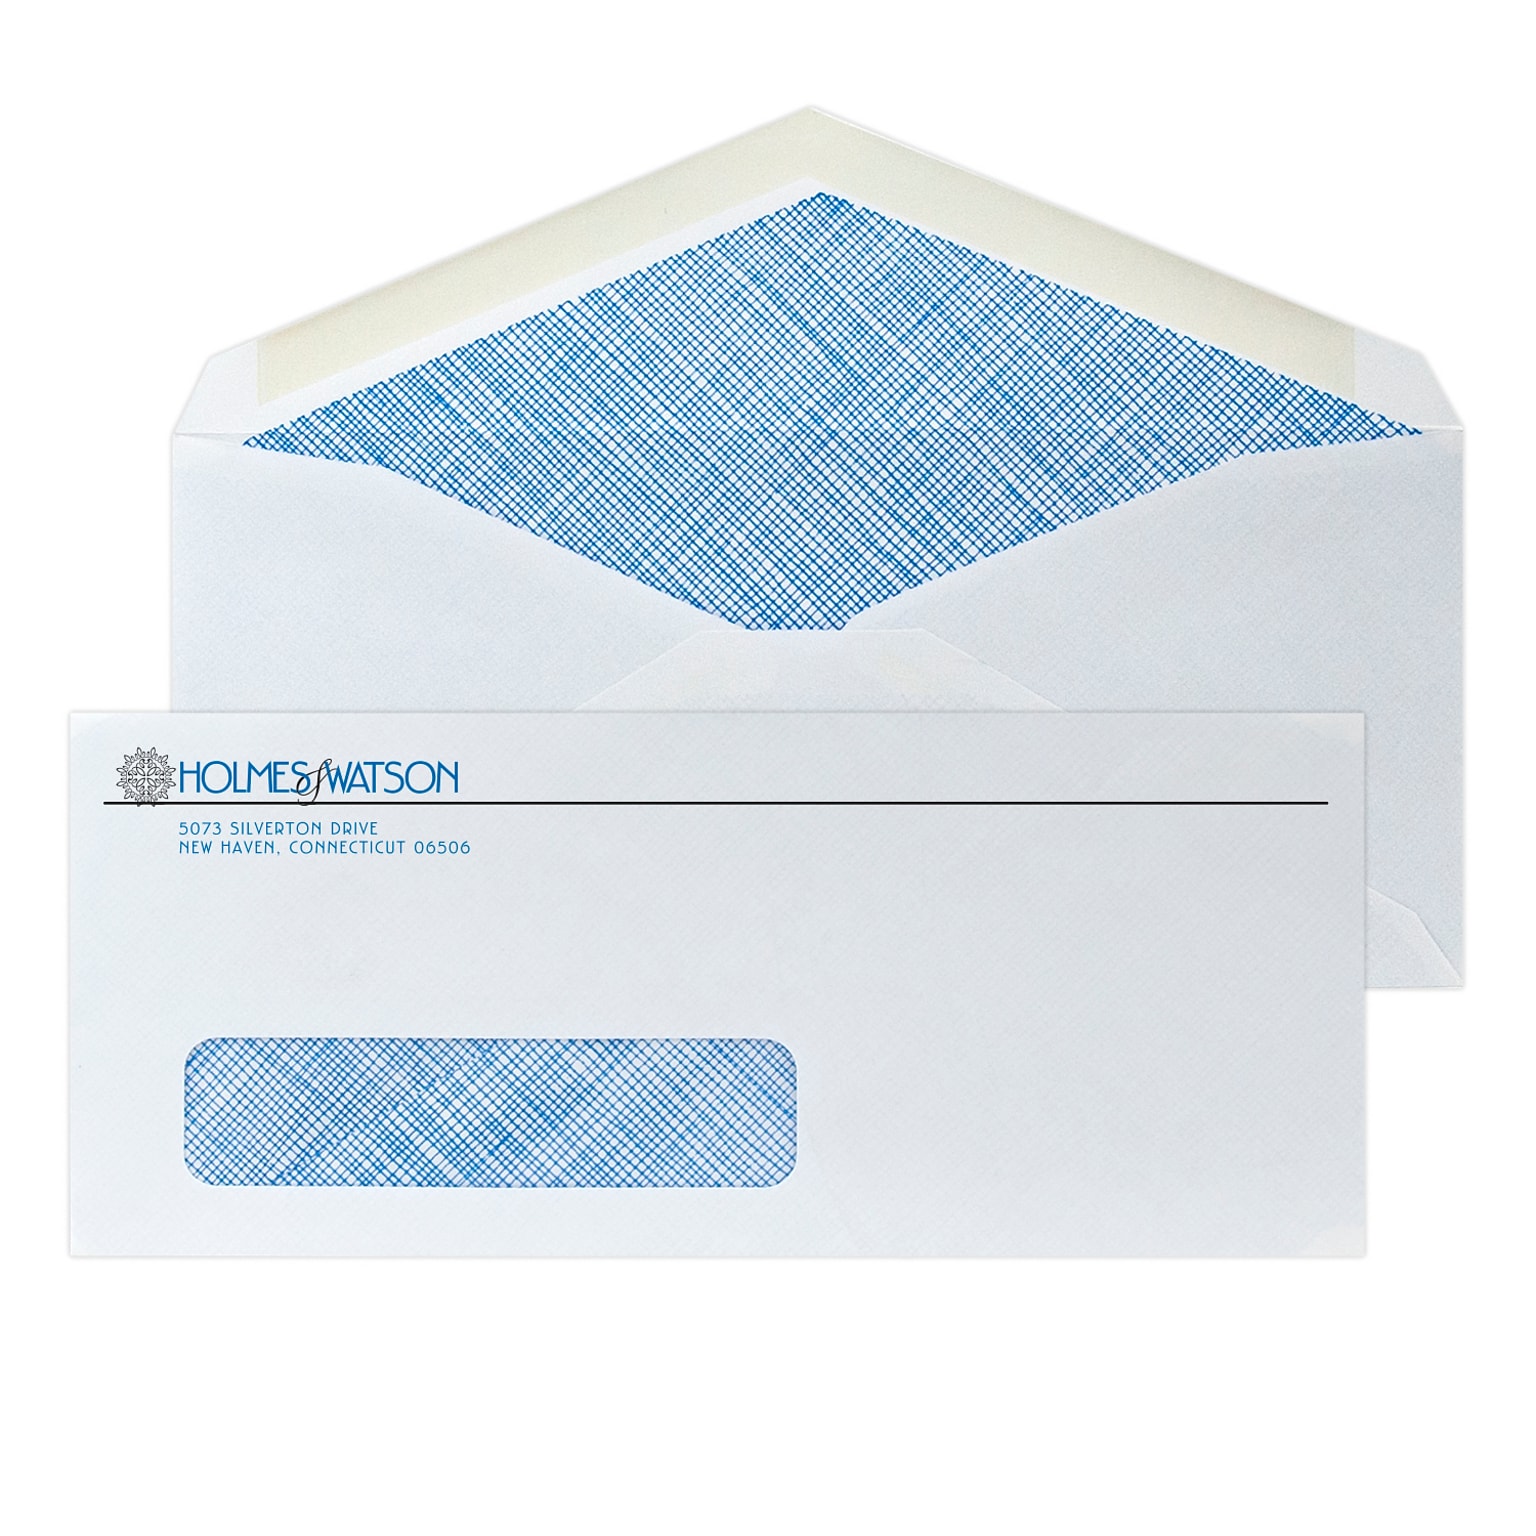 Custom #10 Window Envelopes with Security Tint and V-Flap, 4 1/4 x 9 1/2, 24# White Wove, 2 Standard Inks, 250 / Pack